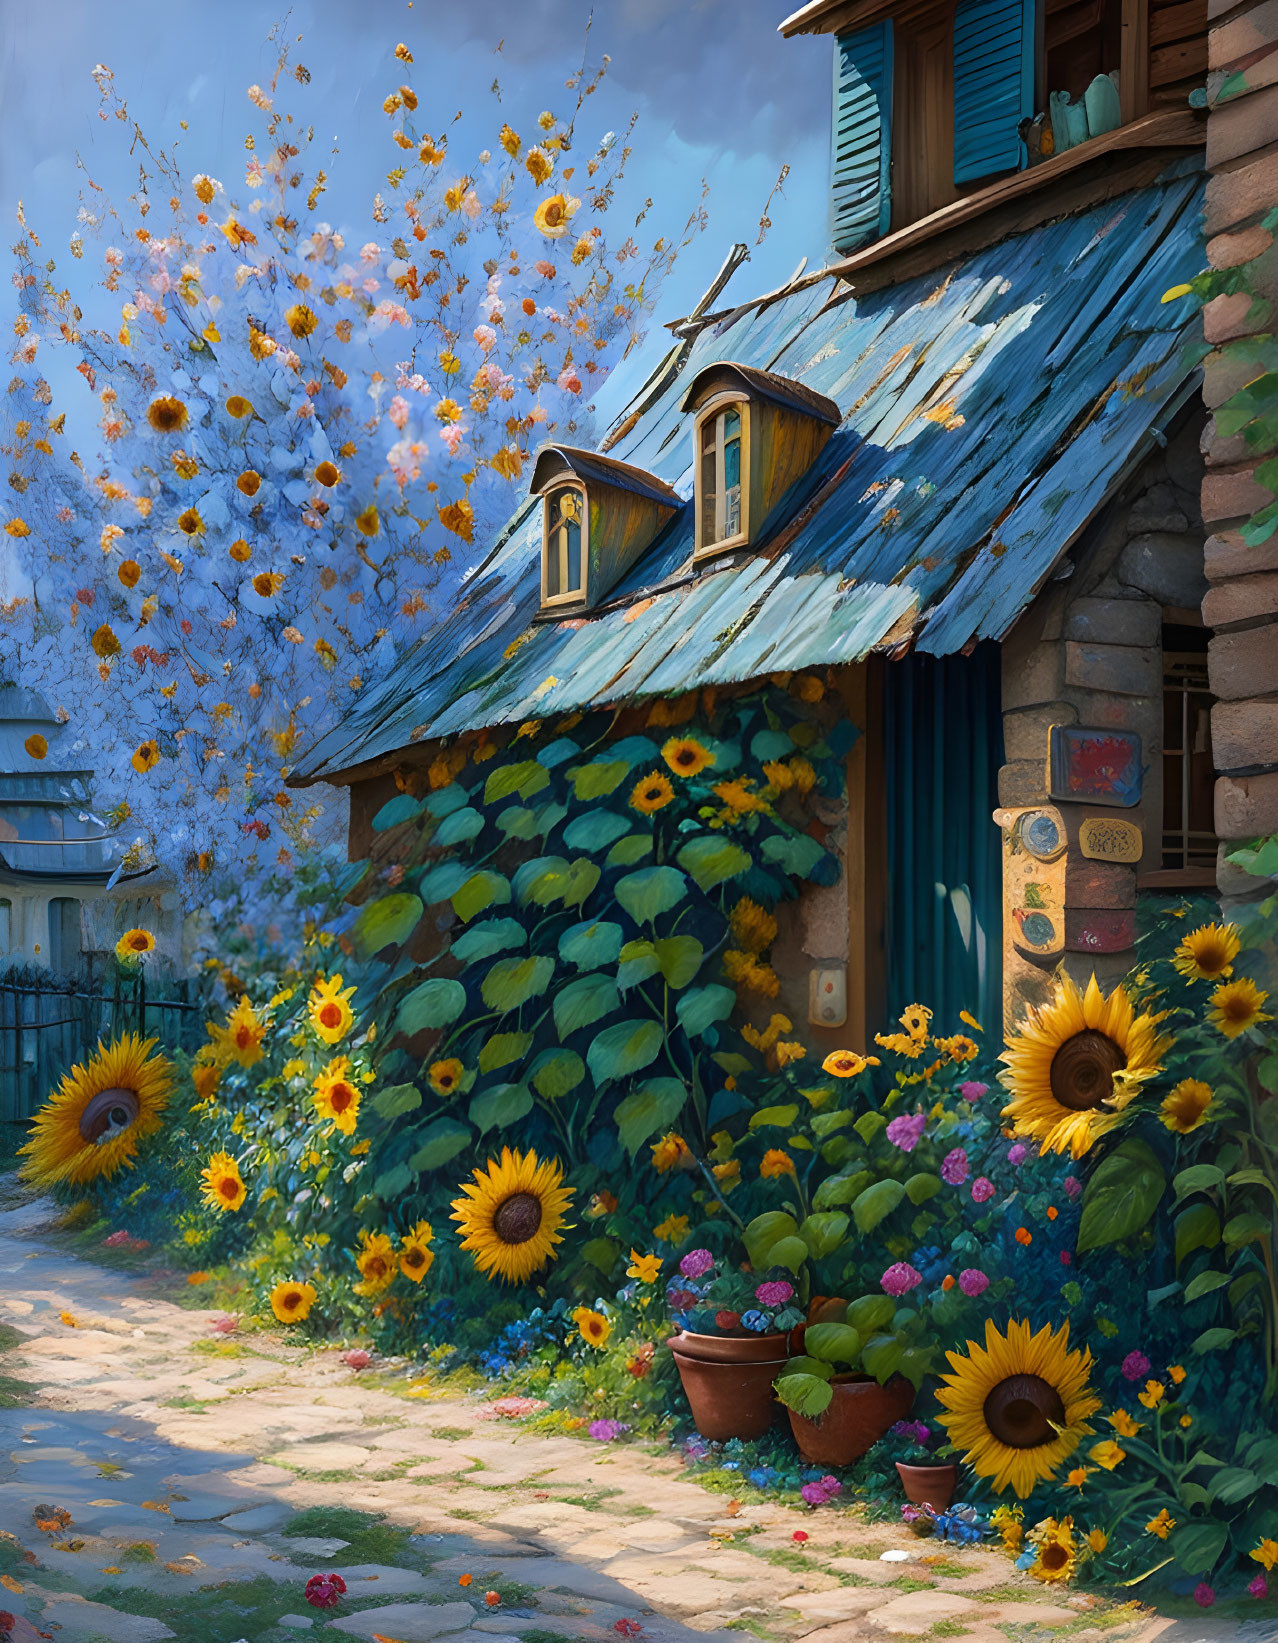 Shed at the Montmartre with sunflower